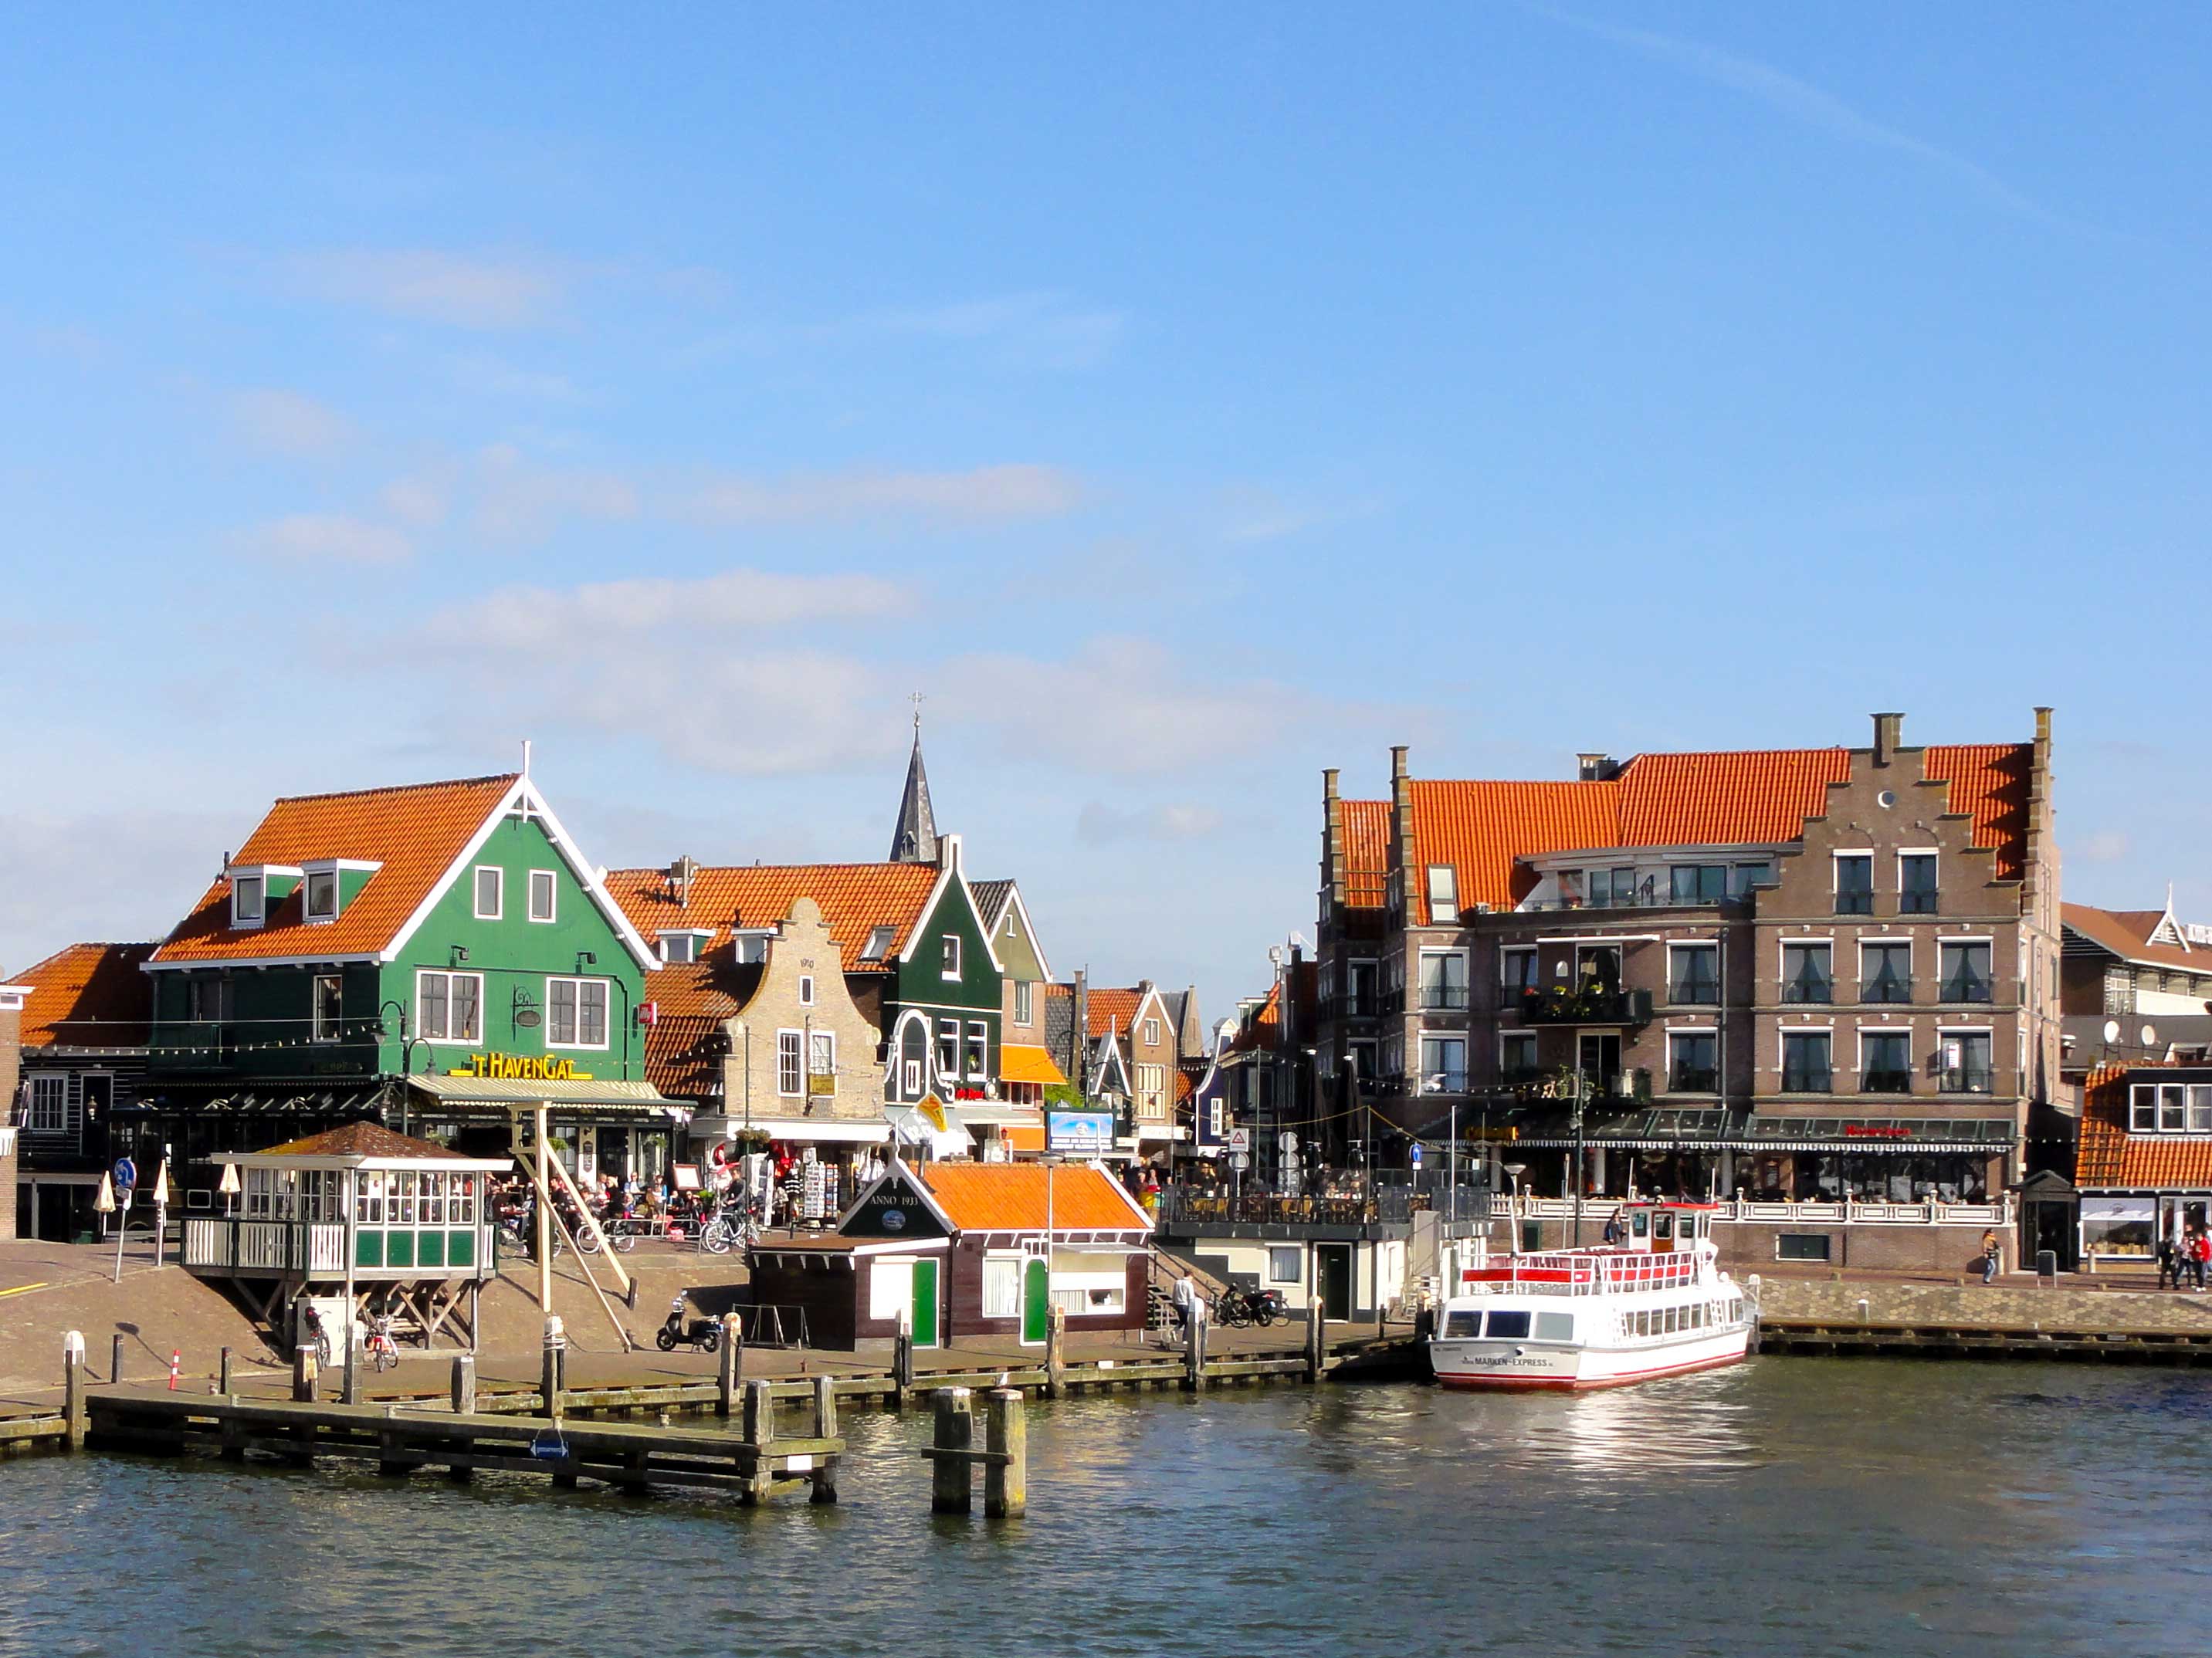 The Best Places to Visit in the Netherlands - Netherlands Tourism